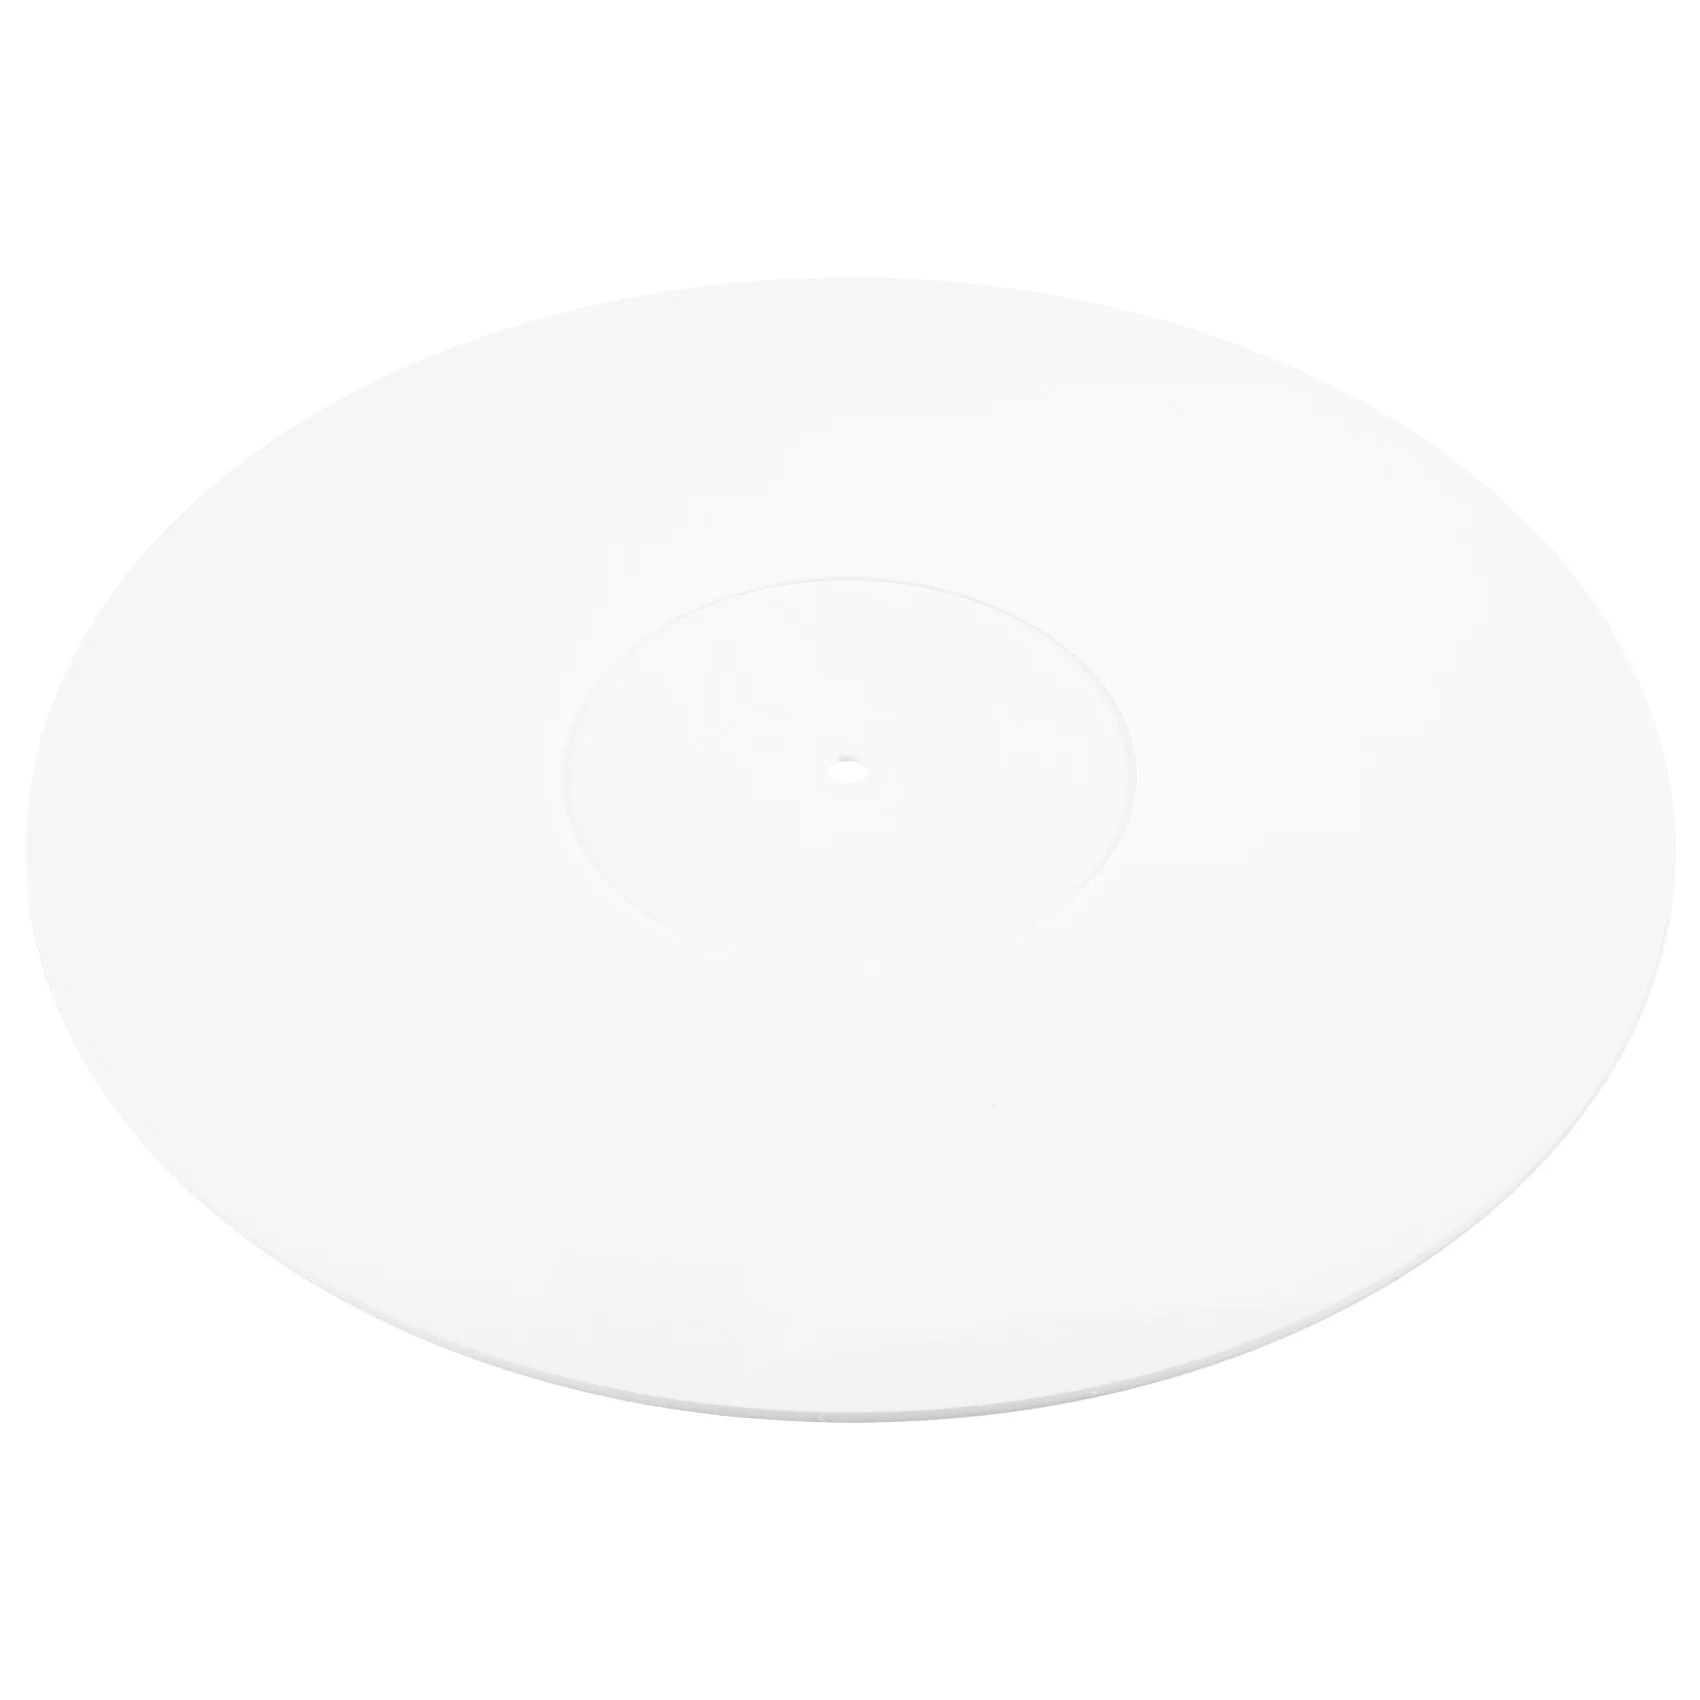 Turntable Acrylic Slipmat for Vinyl LP Record Players - 2.5mm Thick Provides Tighter Bass - 12Inch Platter Mat (White)